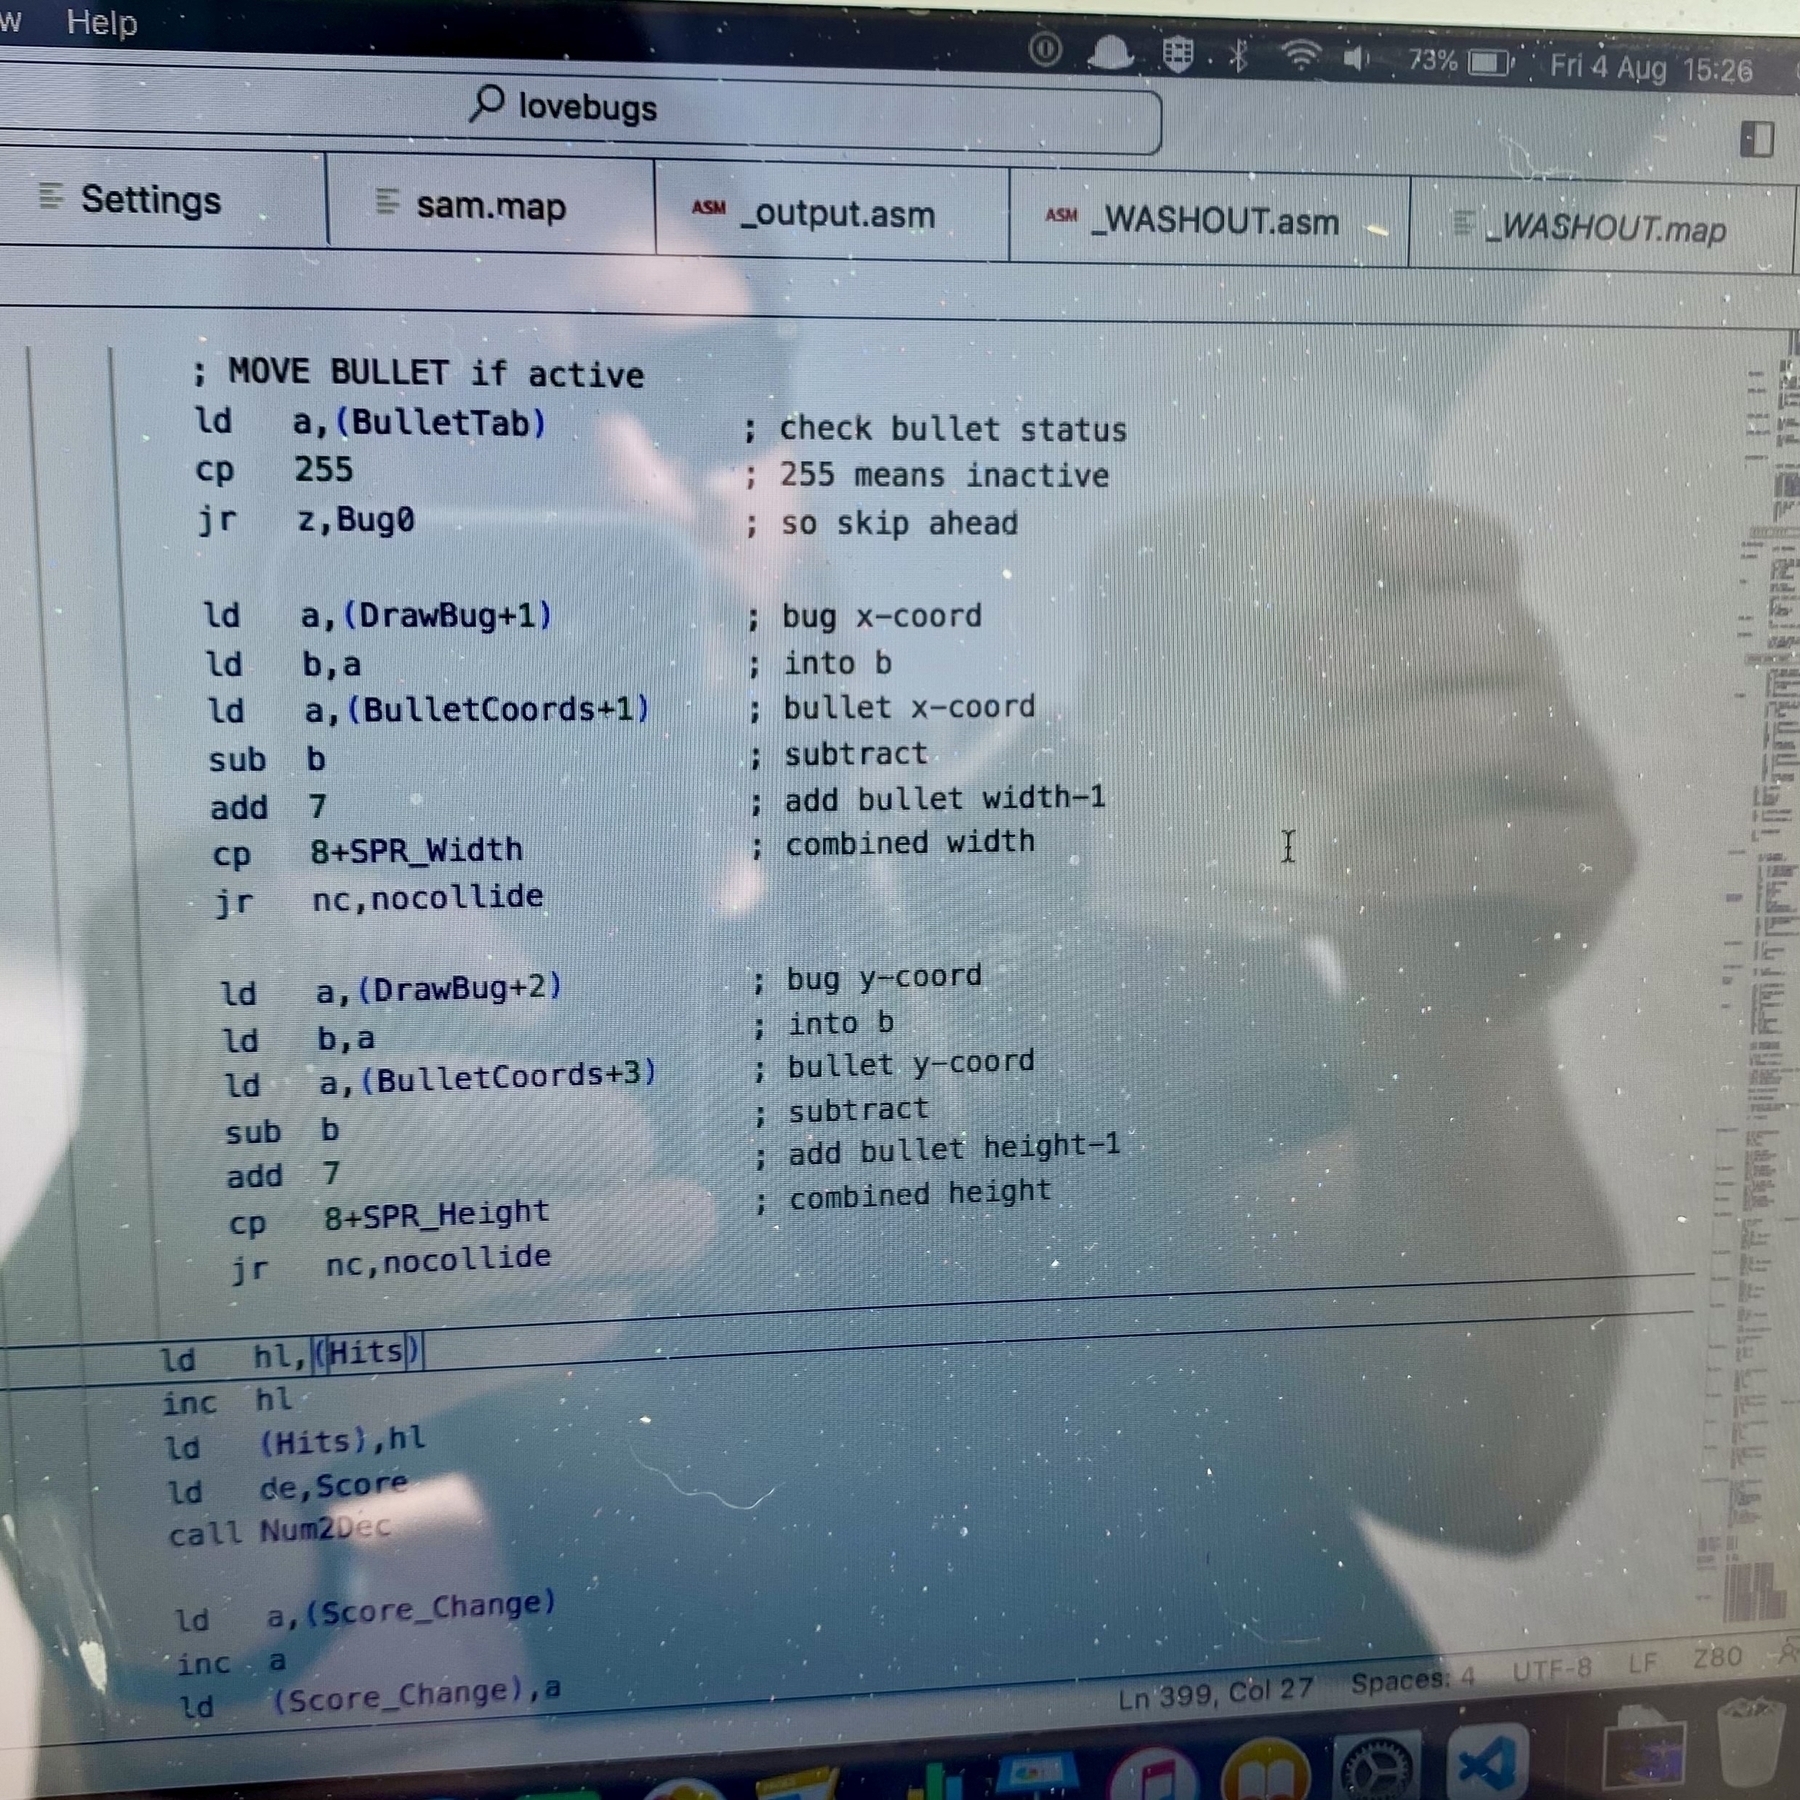 Screenshot of annotated Z80 assembly code that’s designed to detect collisions between game objects, “bullet” and “bug”. Some smug guy can be seen reflected in the glass surface of the computer screen. He might be holding a piña colada.